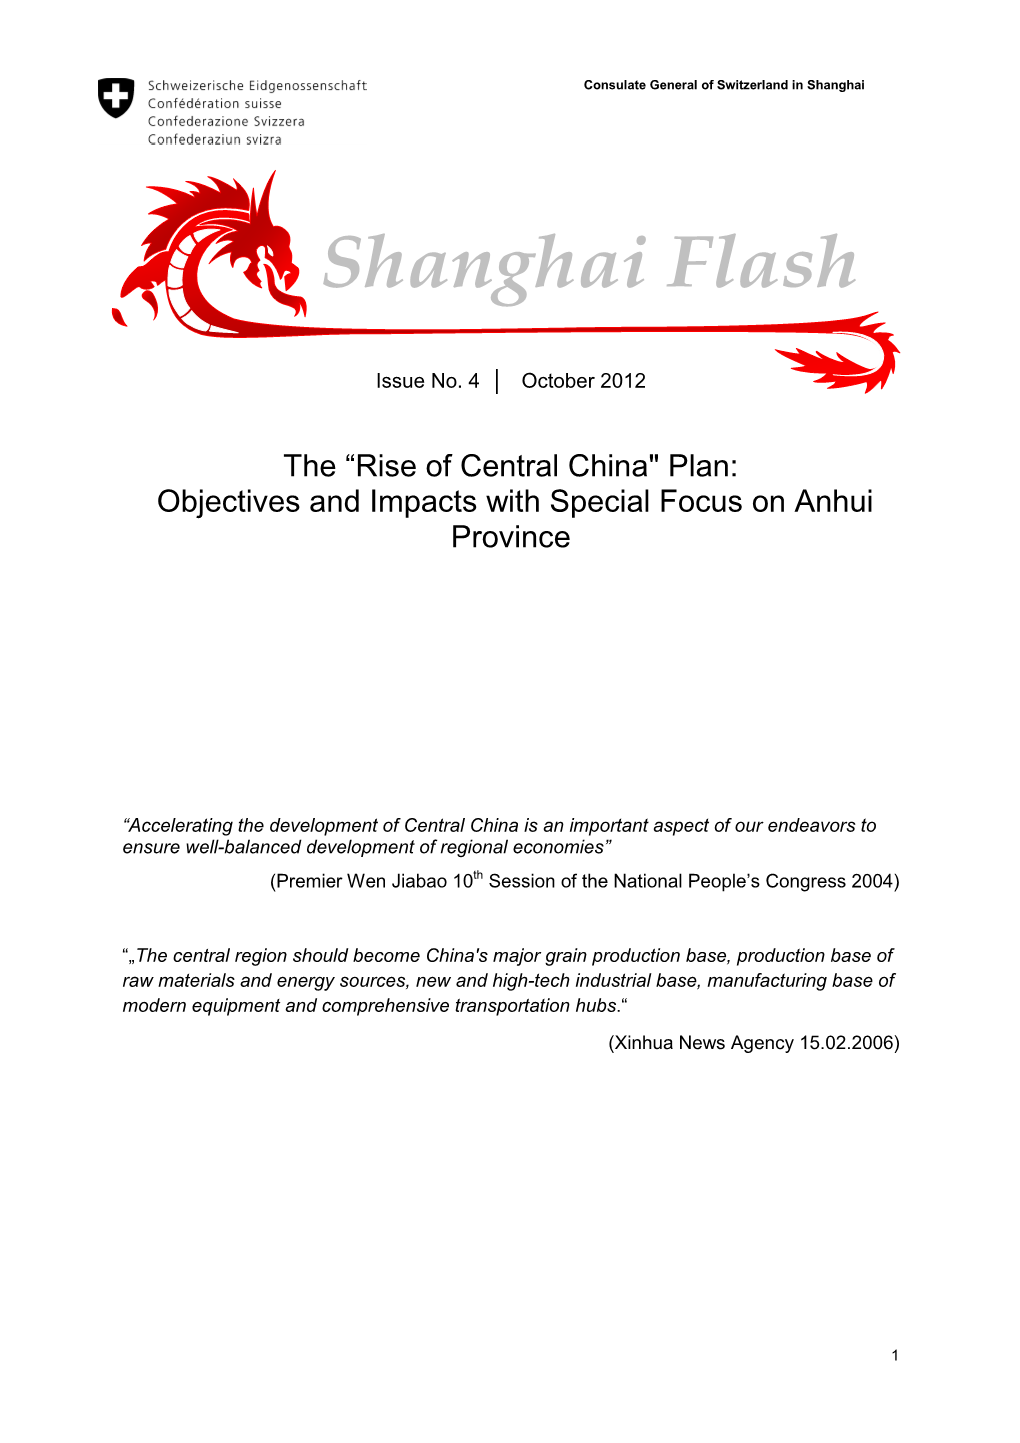 The “Rise of Central China" Plan: Objectives and Impacts with Special Focus on Anhui Province